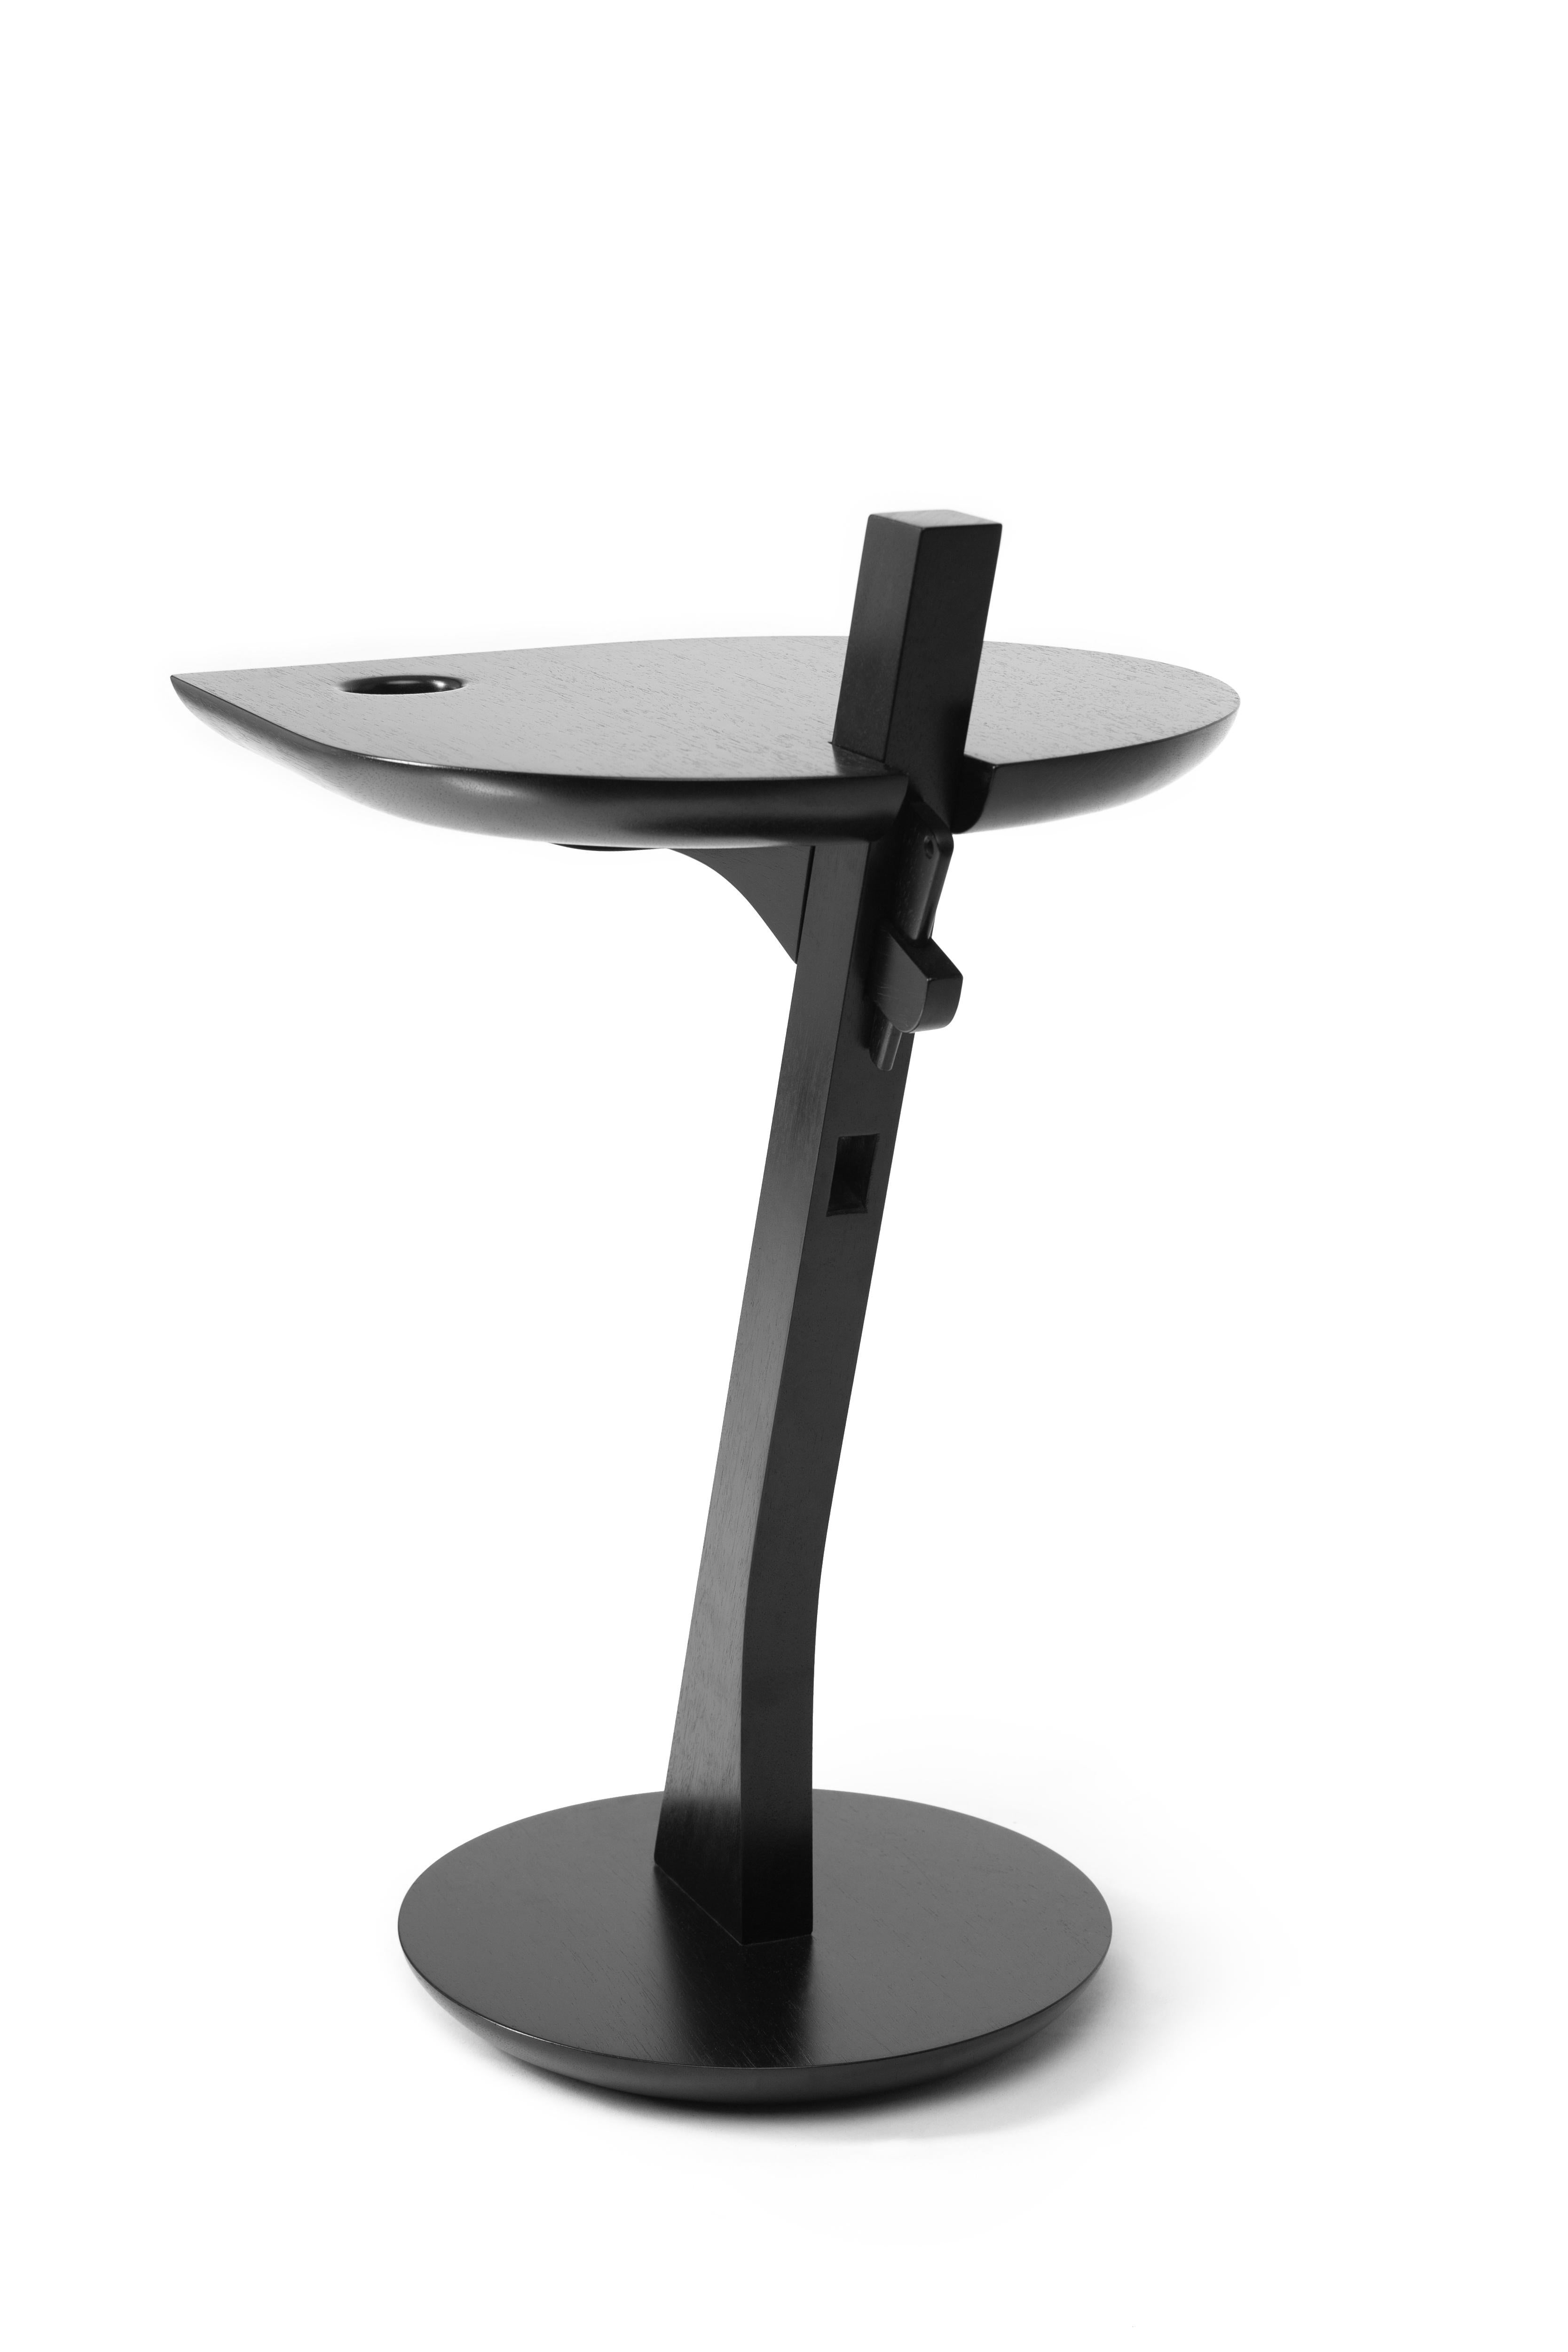 Brazilian Set of 04 Side Tables IRACEMA in Ebony Finish Wood For Sale